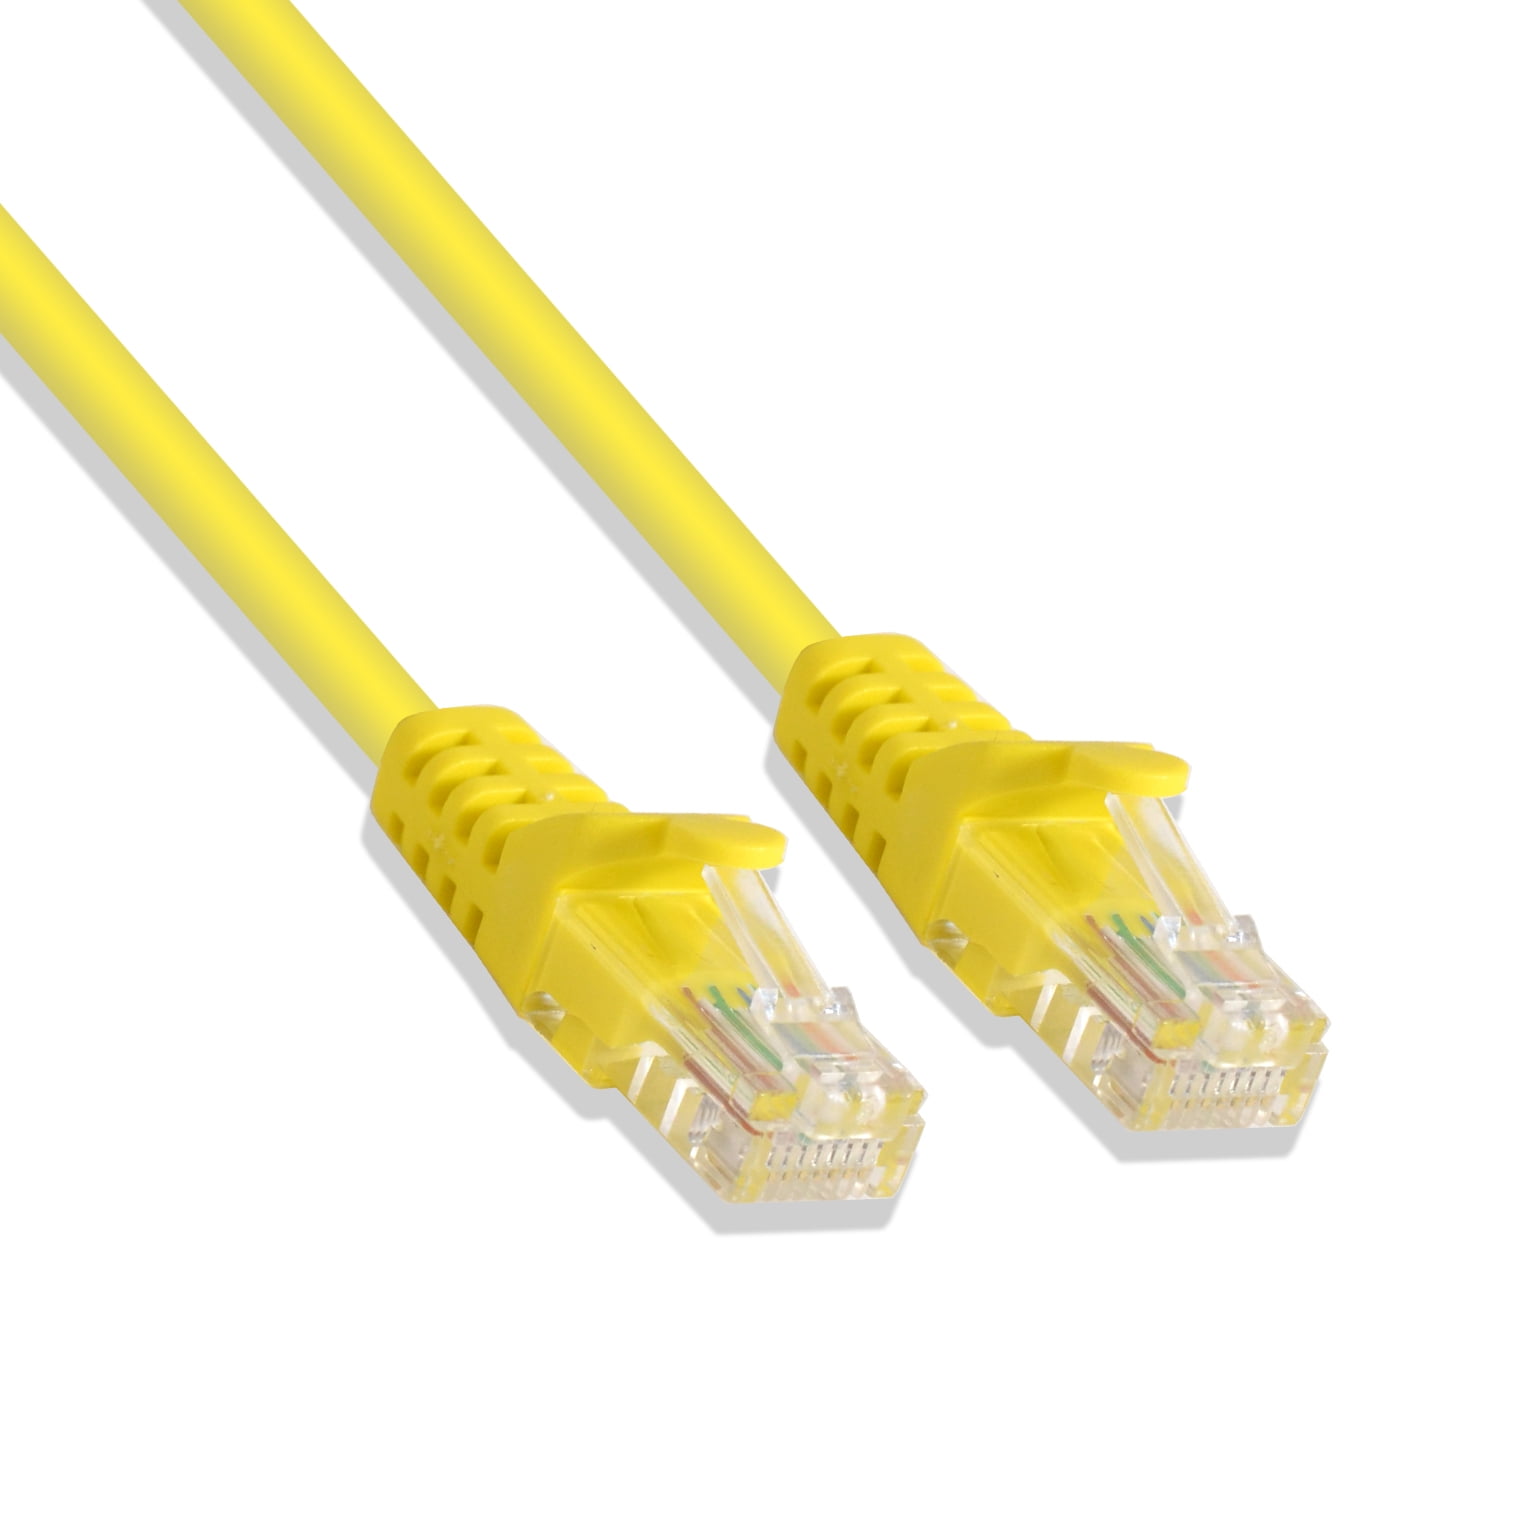 Monoprice Cat8 Ethernet Network Cable - 5 Feet - Blue | 2GHz, 40G 